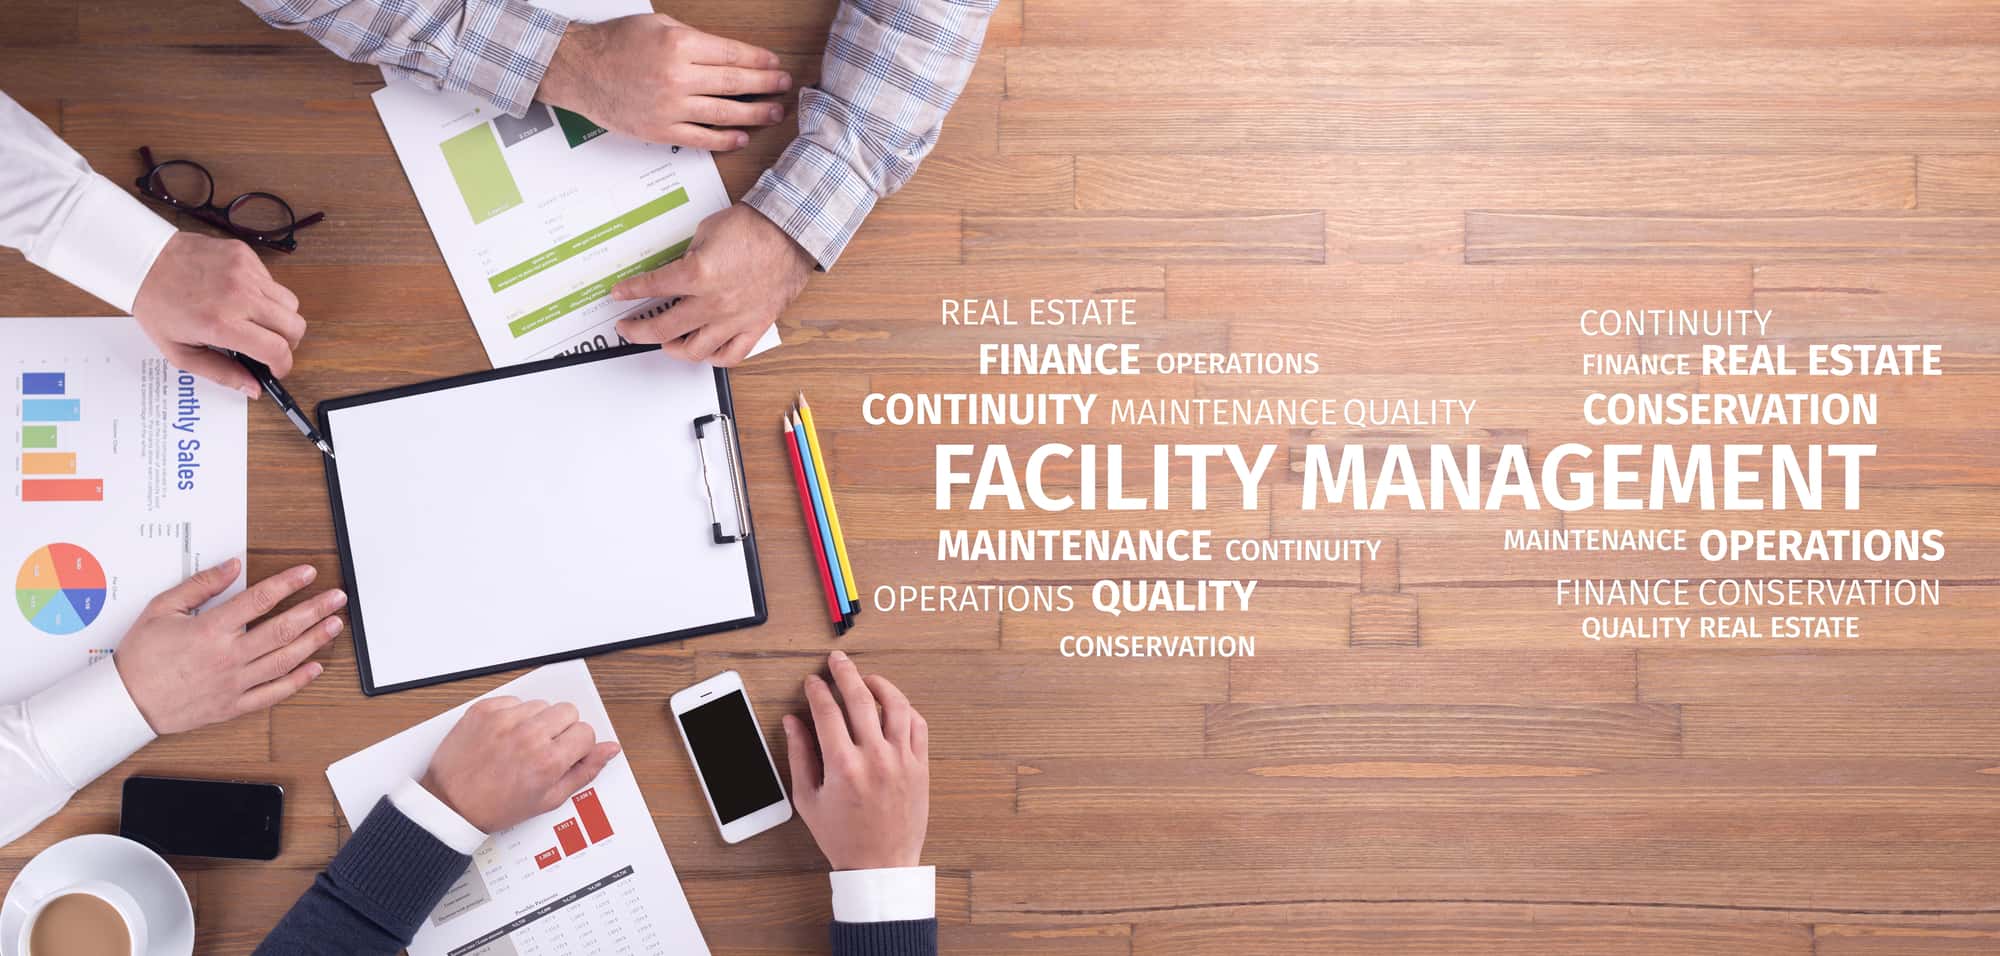 Facilities Management Services For Your Business Concerns